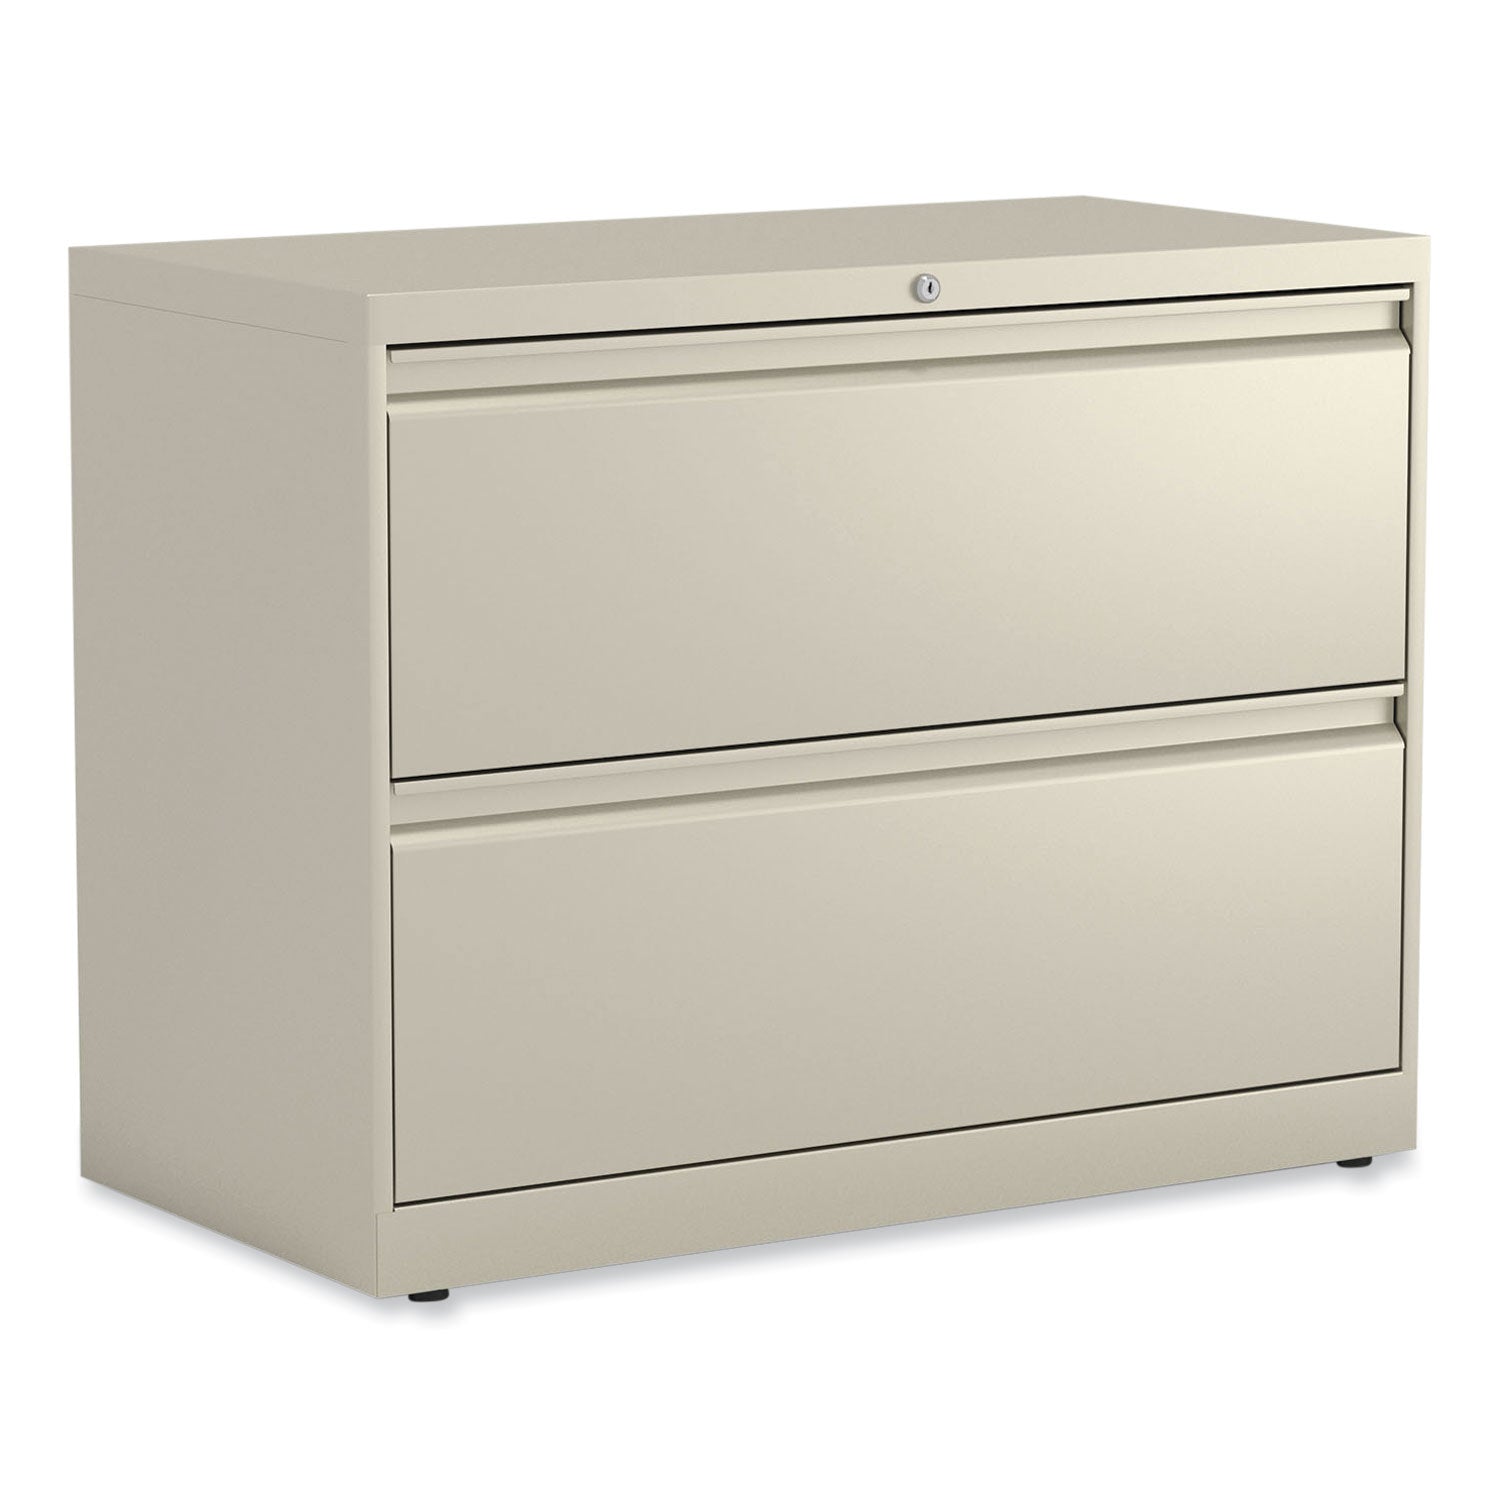 lateral-file-2-legal-letter-size-file-drawers-putty-36-x-1863-x-28_alehlf3629py - 1